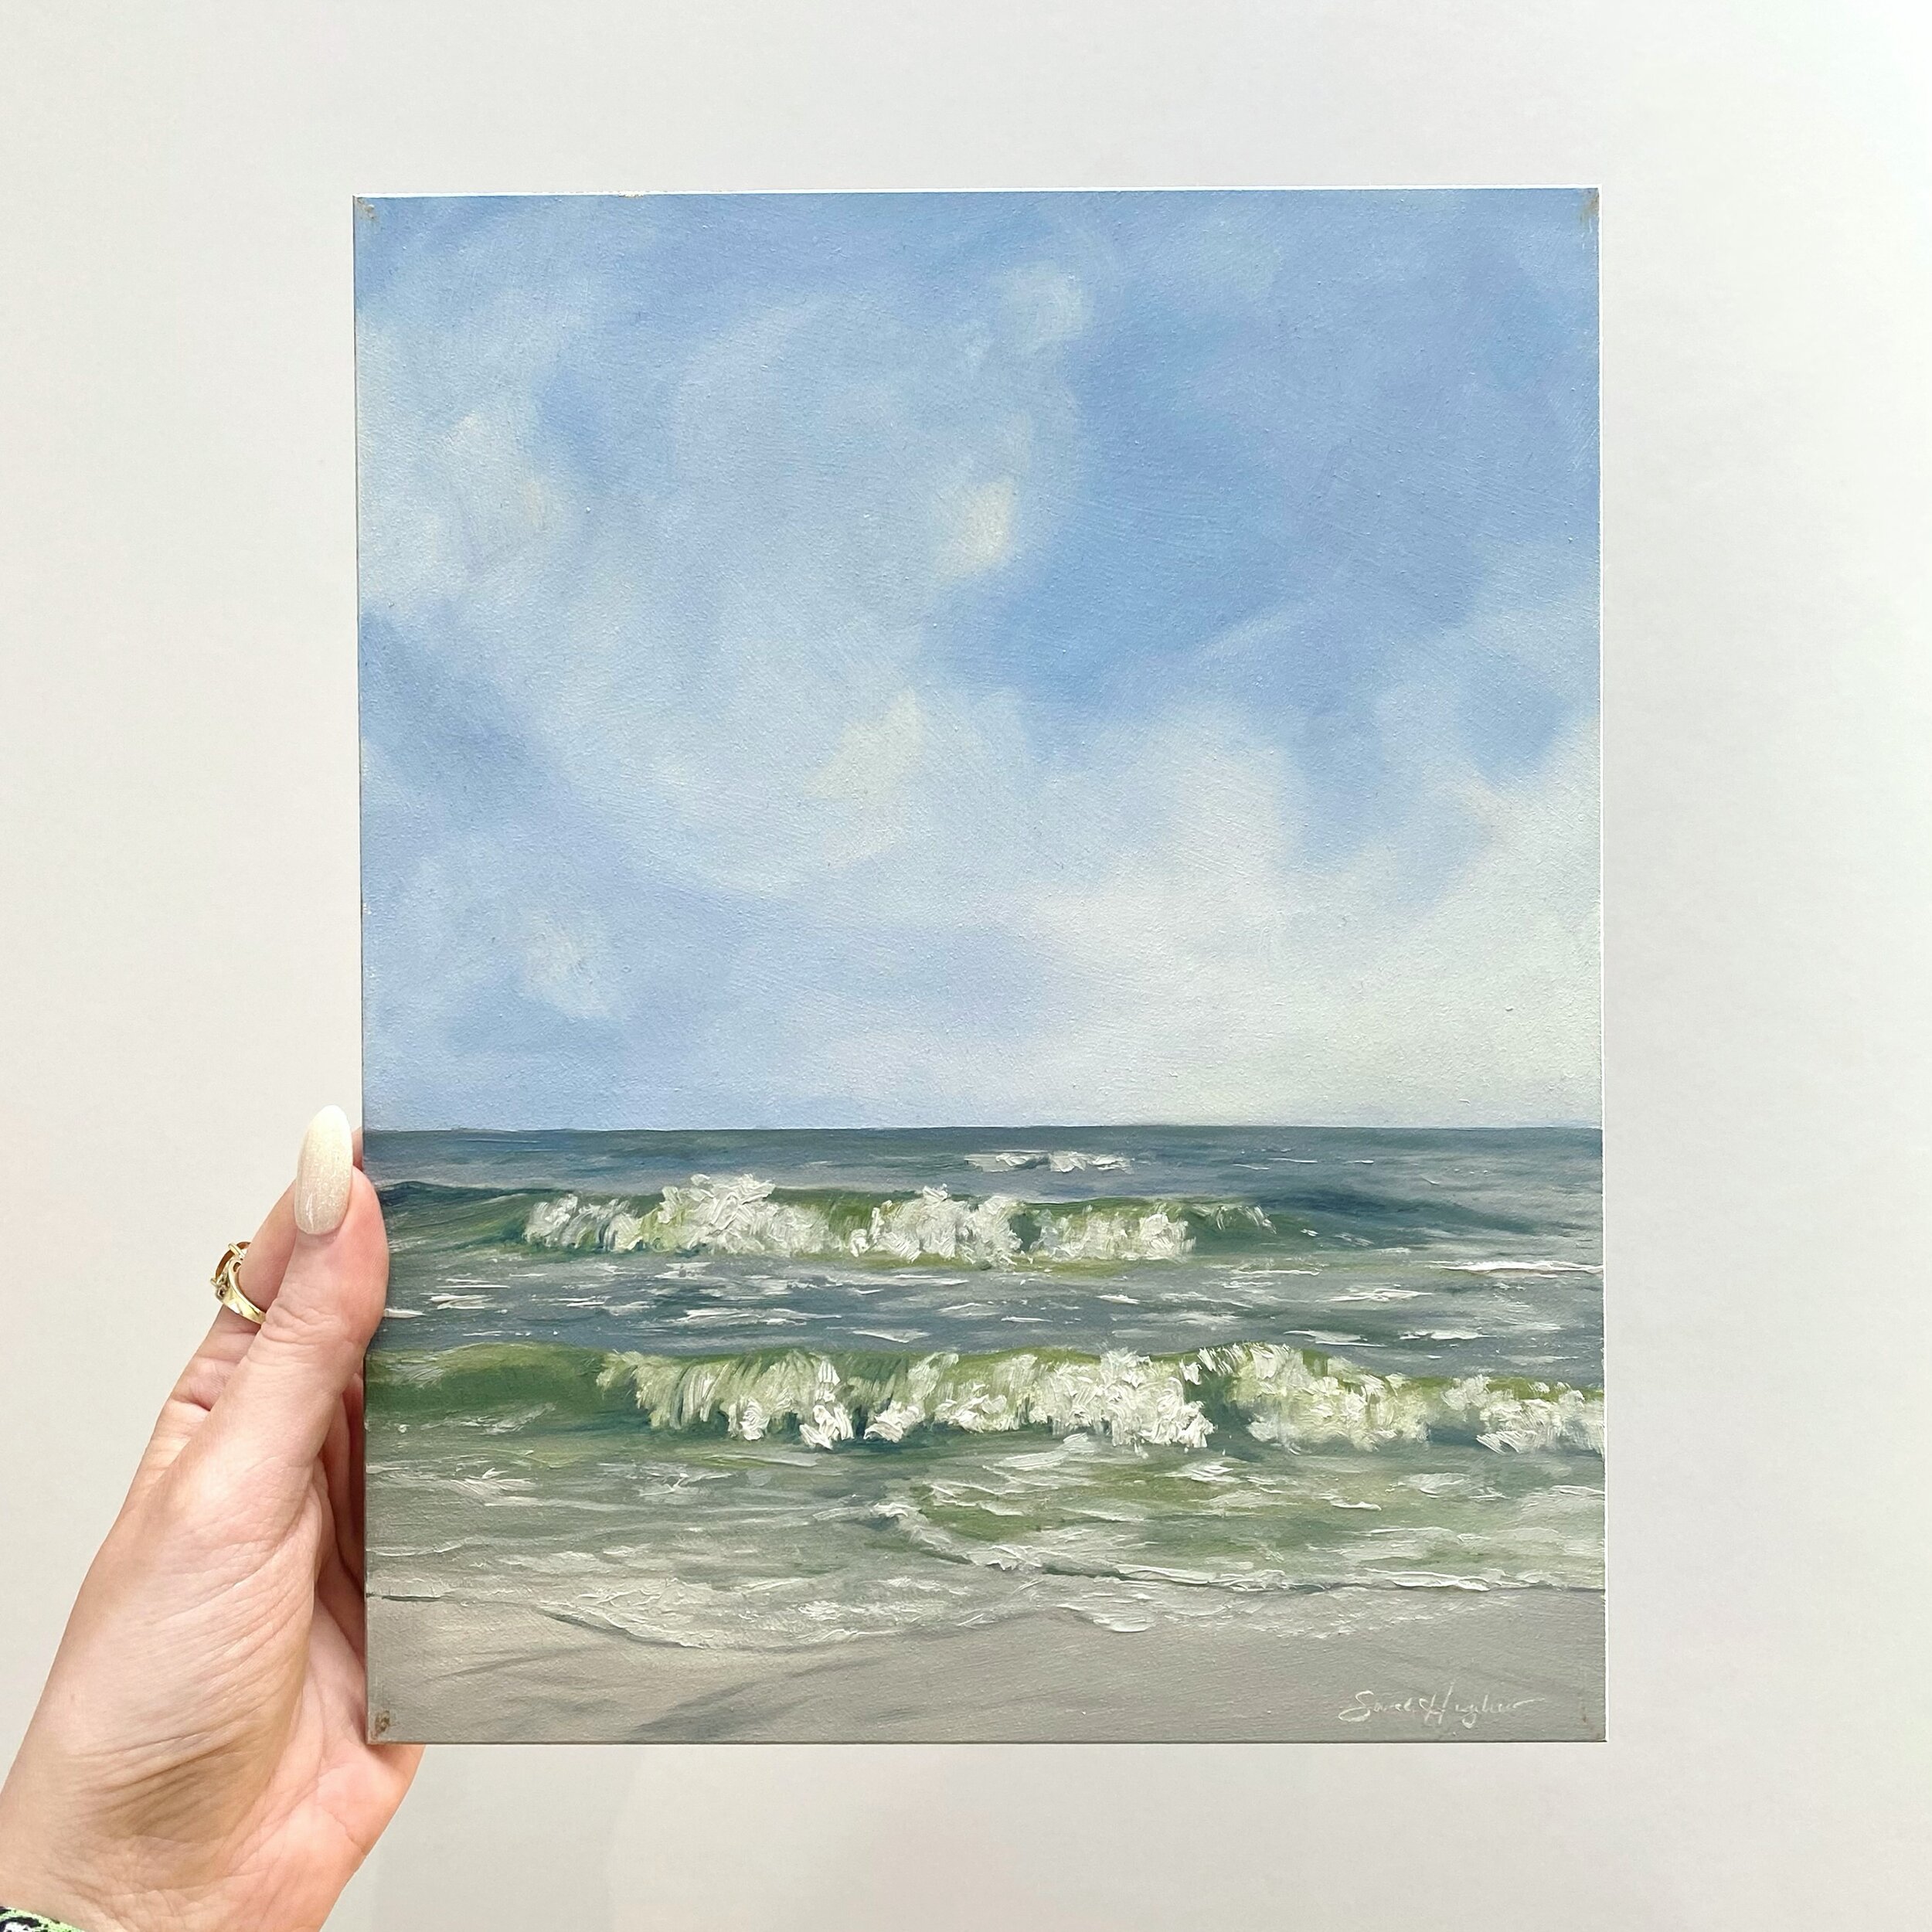 Wishing it was summer already? Us too! 🙌This @sarahhughes_art piece captures the waves perfectly! 🌊

#painting #artwork #woodpanel #artist #painted #artgallery #localgallery #localart #gainesville #gainesvilleart #frameshop #framing #customframing 